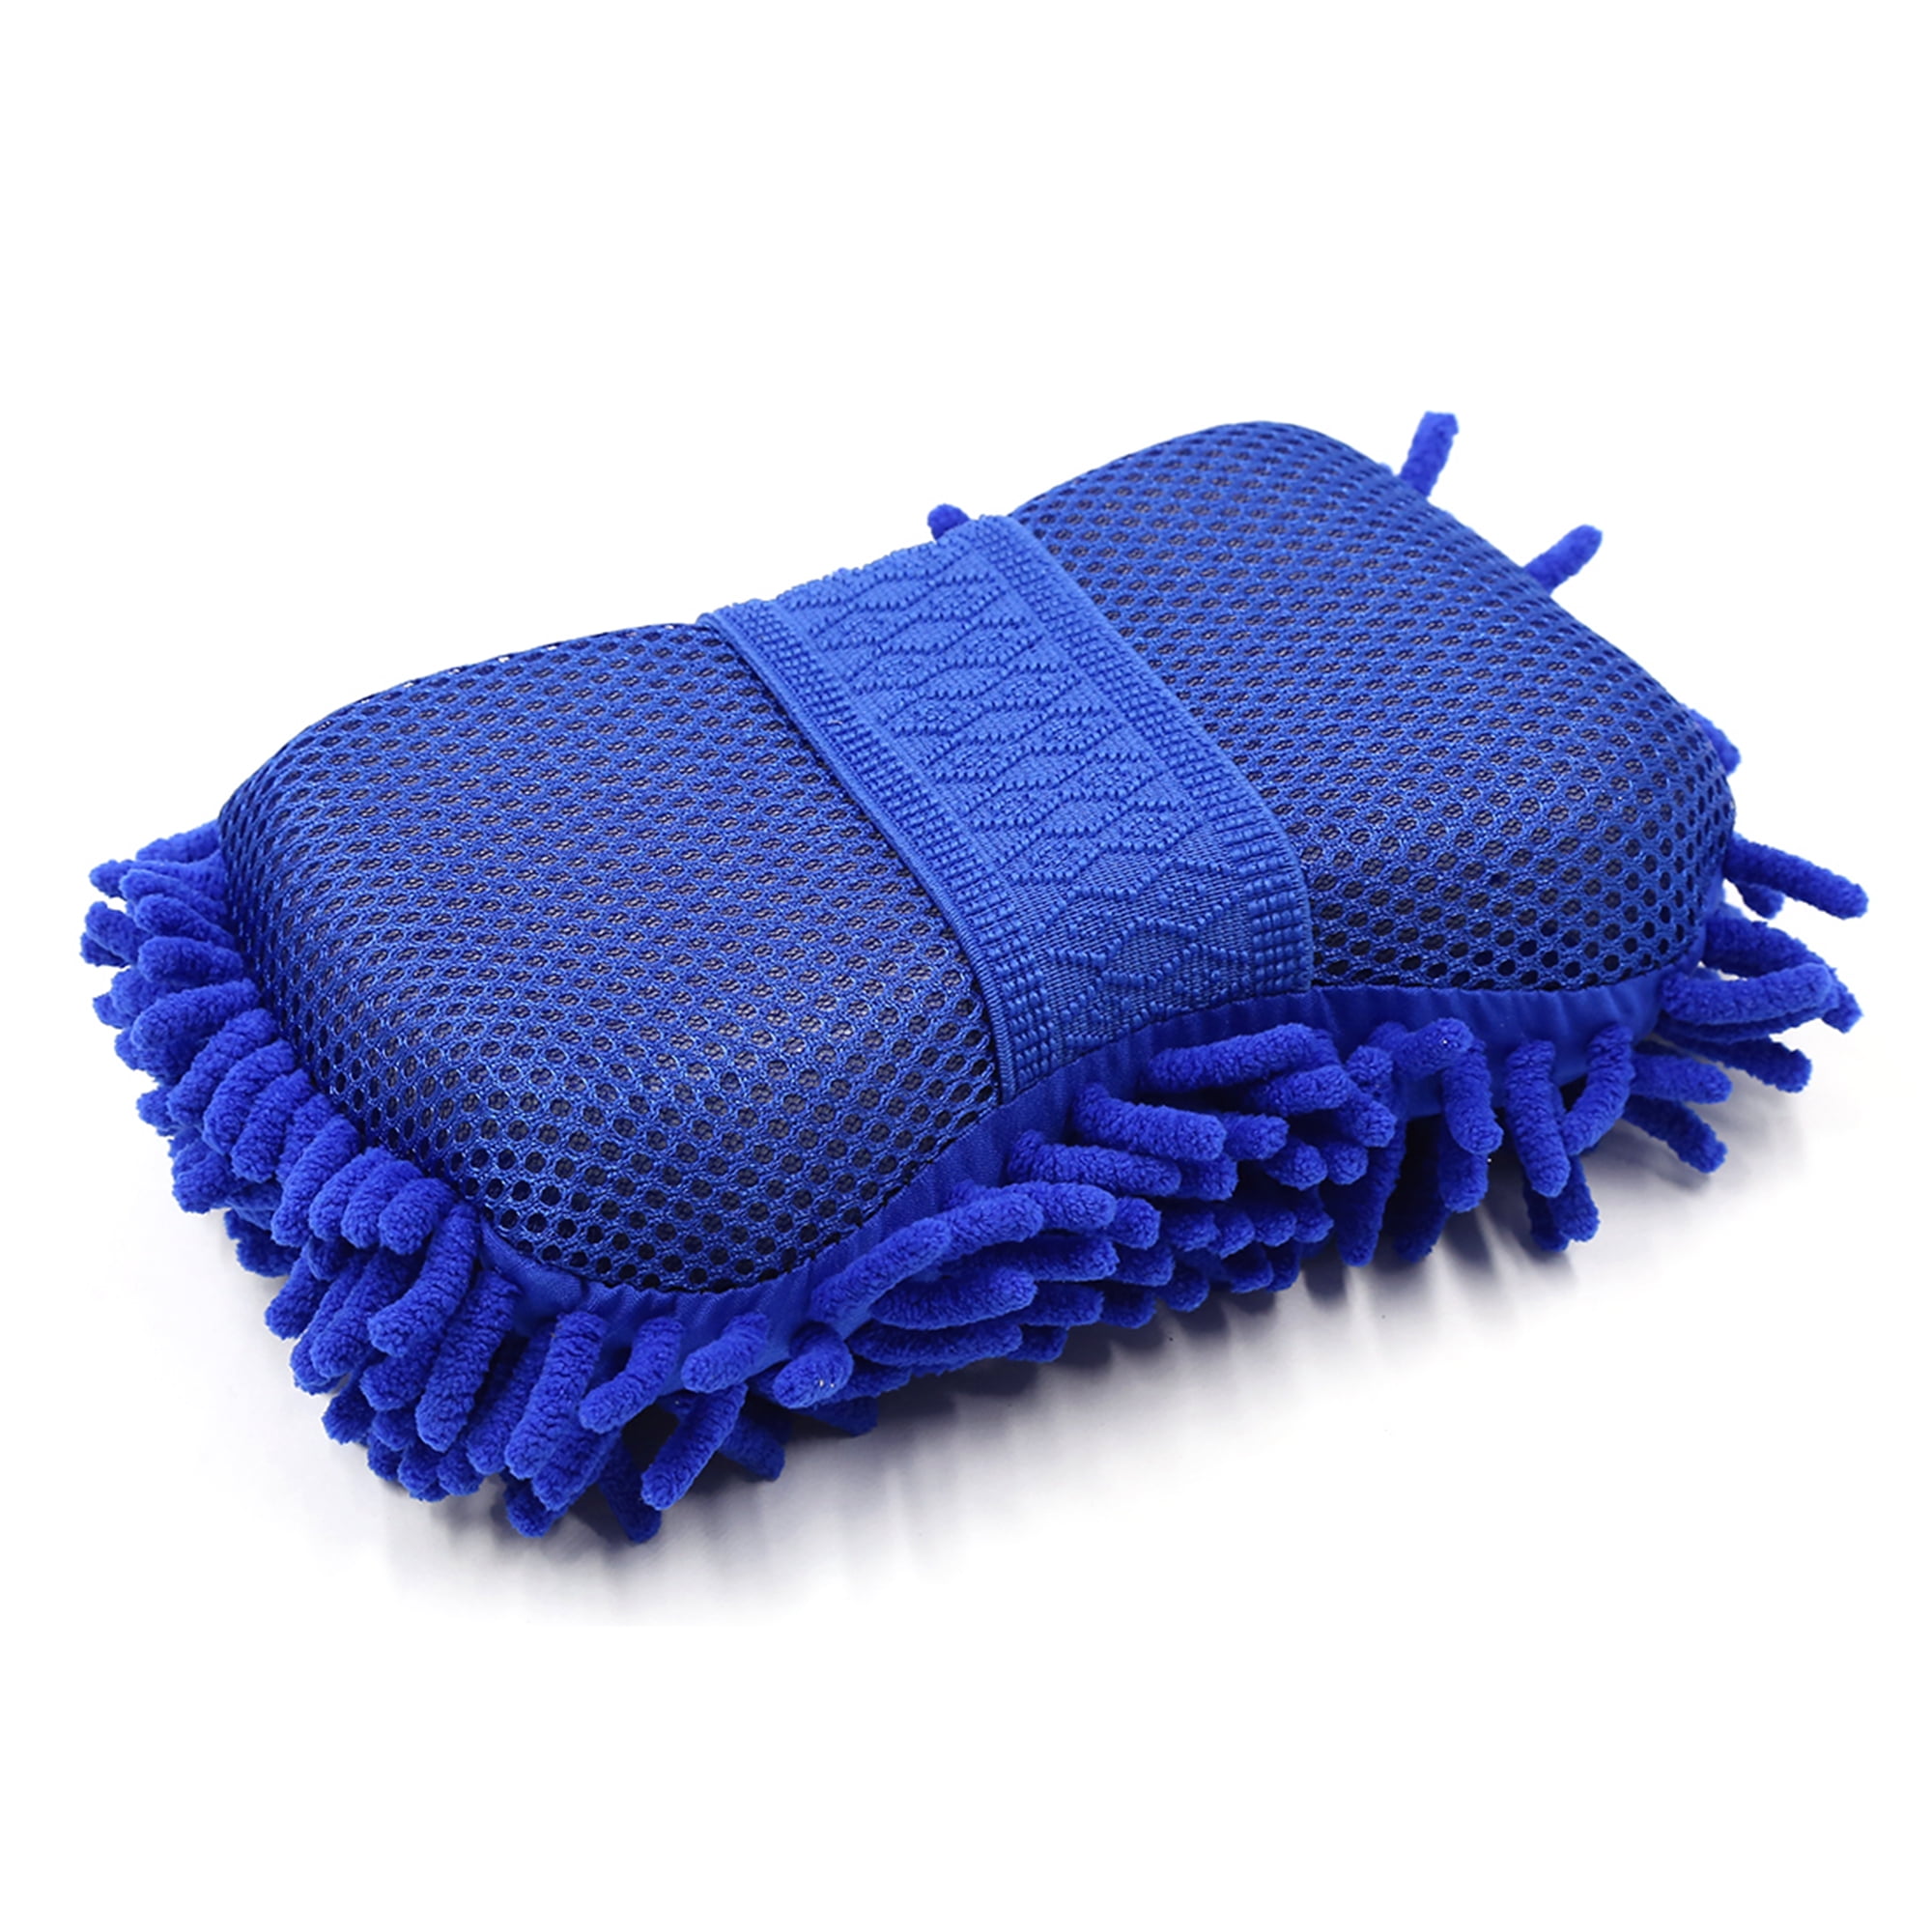 Microfiber Chenille Car Vehicle Care Washing Brush Sponge Pad Cleaning Tool s,FR 